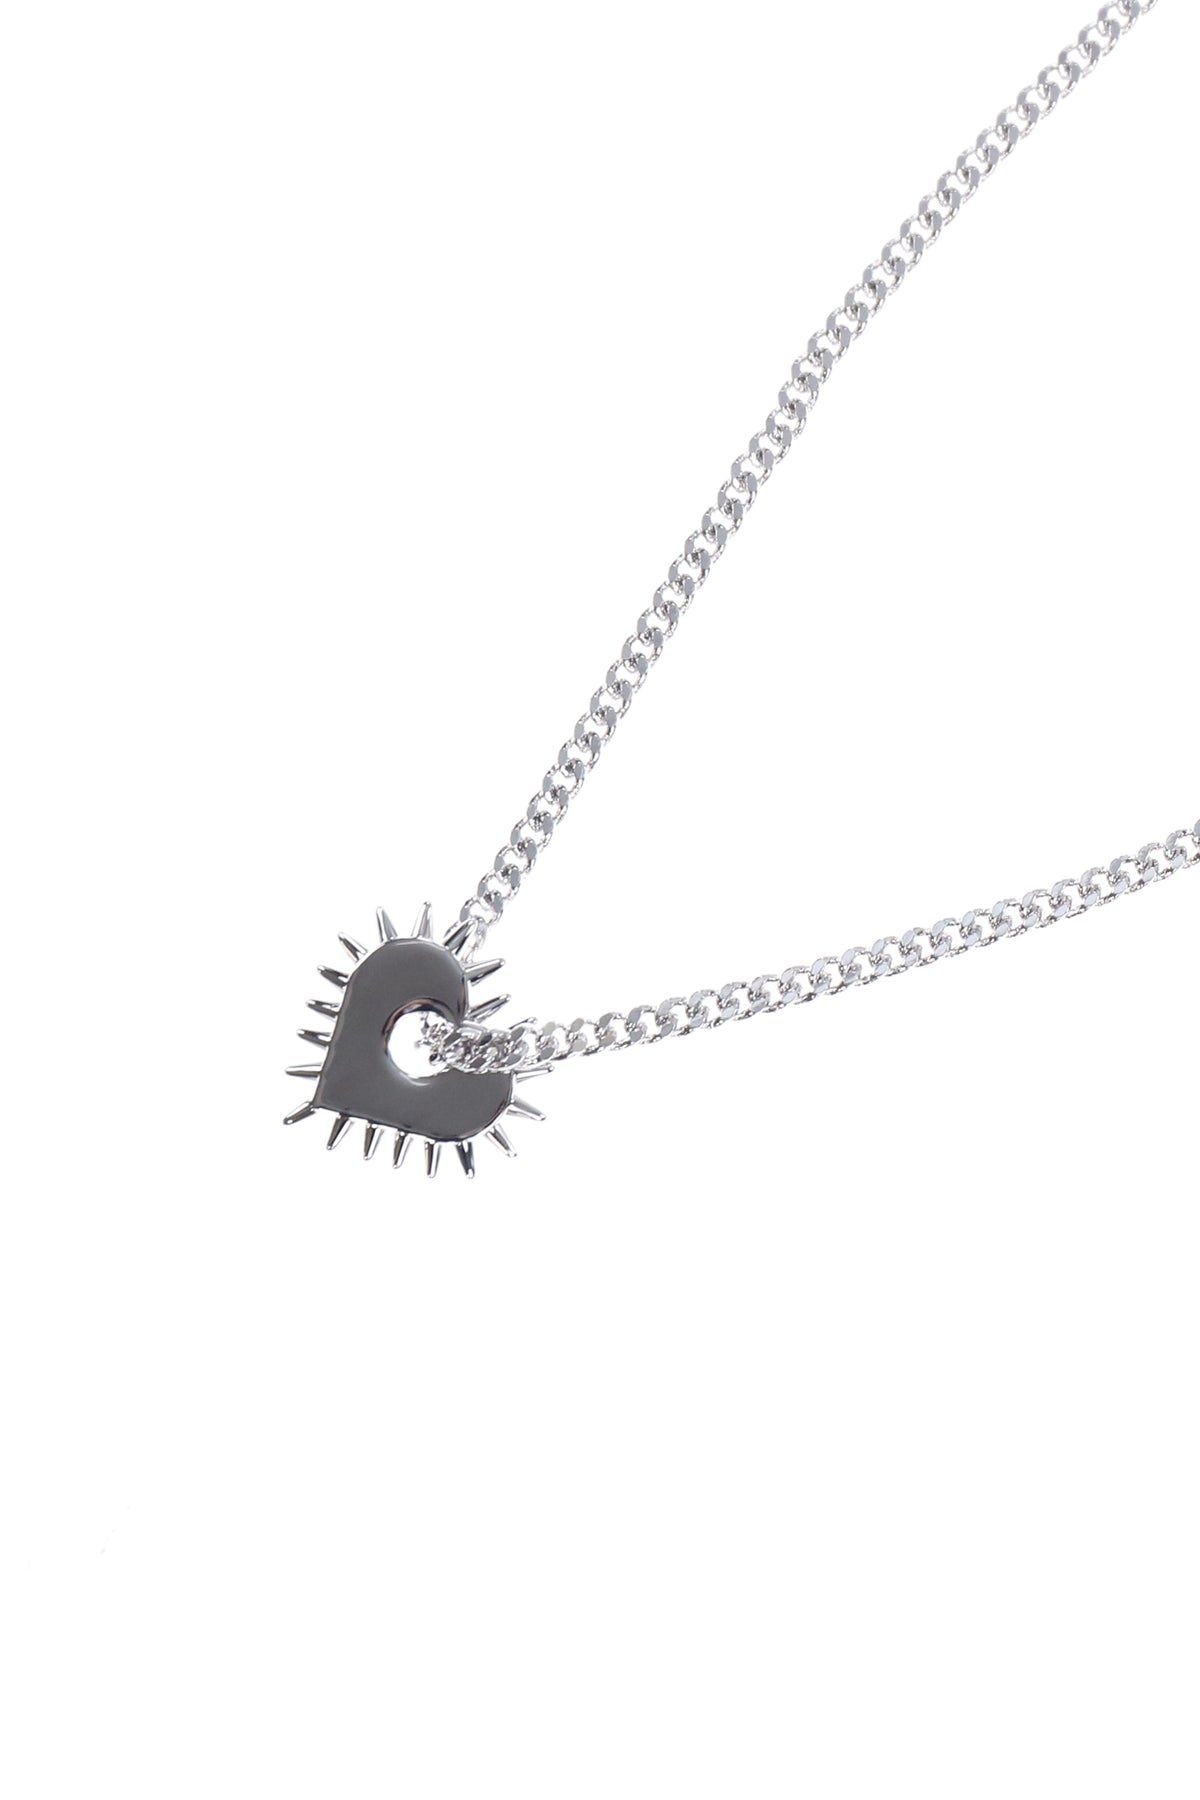 SPIKE HEART NECKLACE / SIL